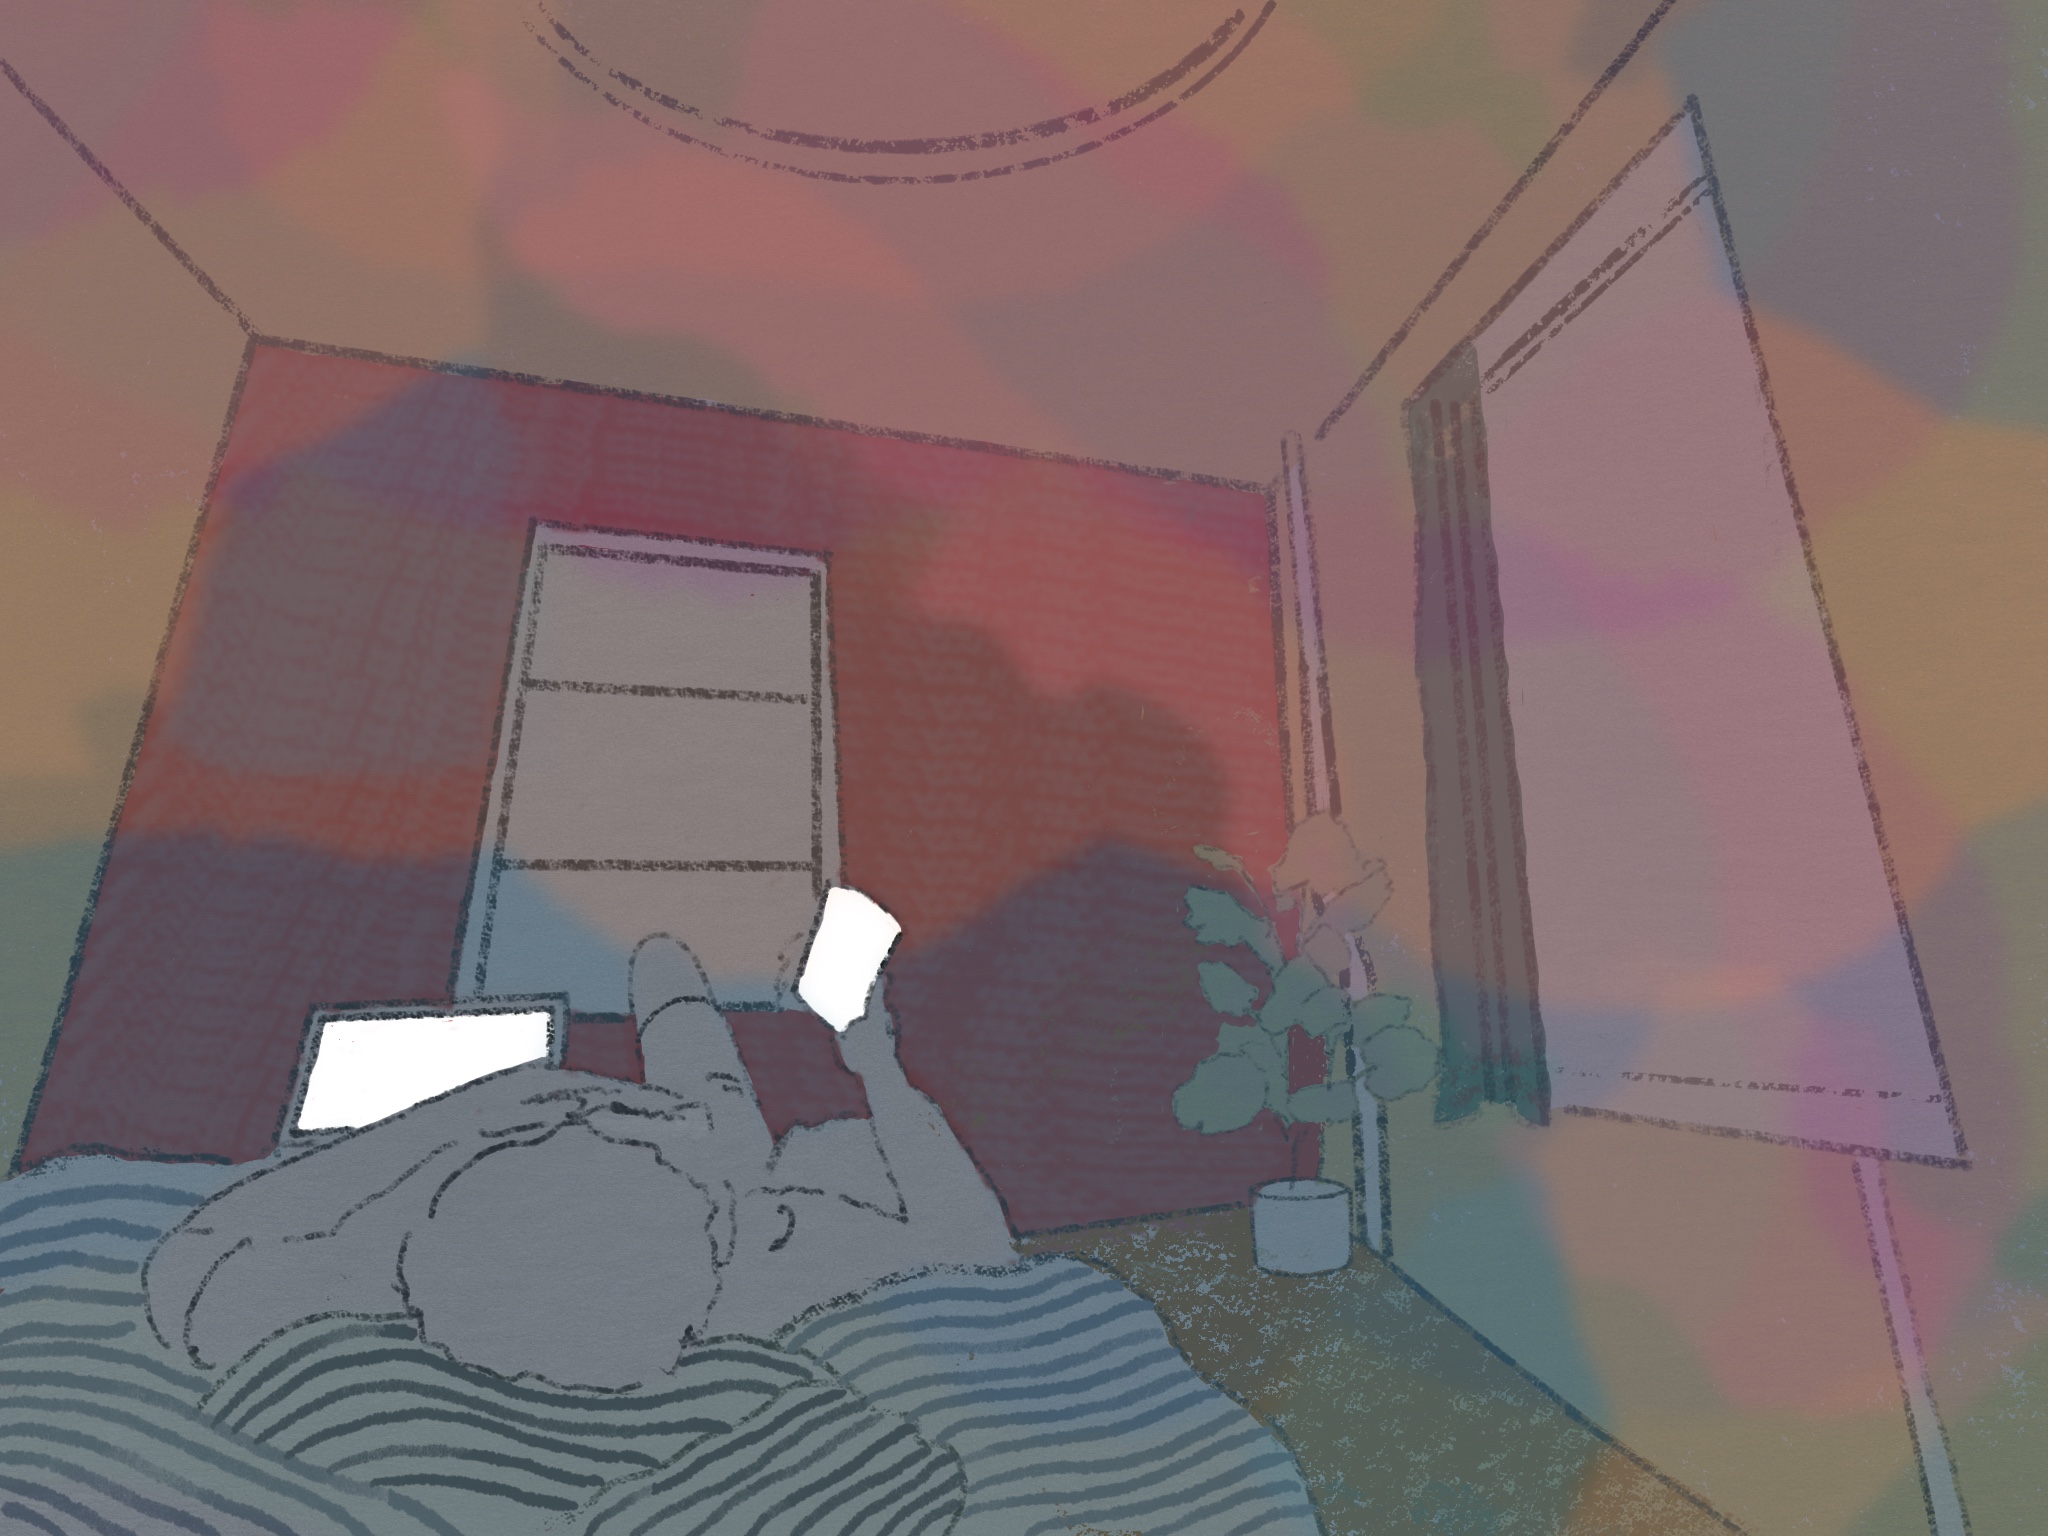 illustration of person lying on bed looking at phone held in hand, open laptop on the side, darkened room overlaid with multicolored shapes of light